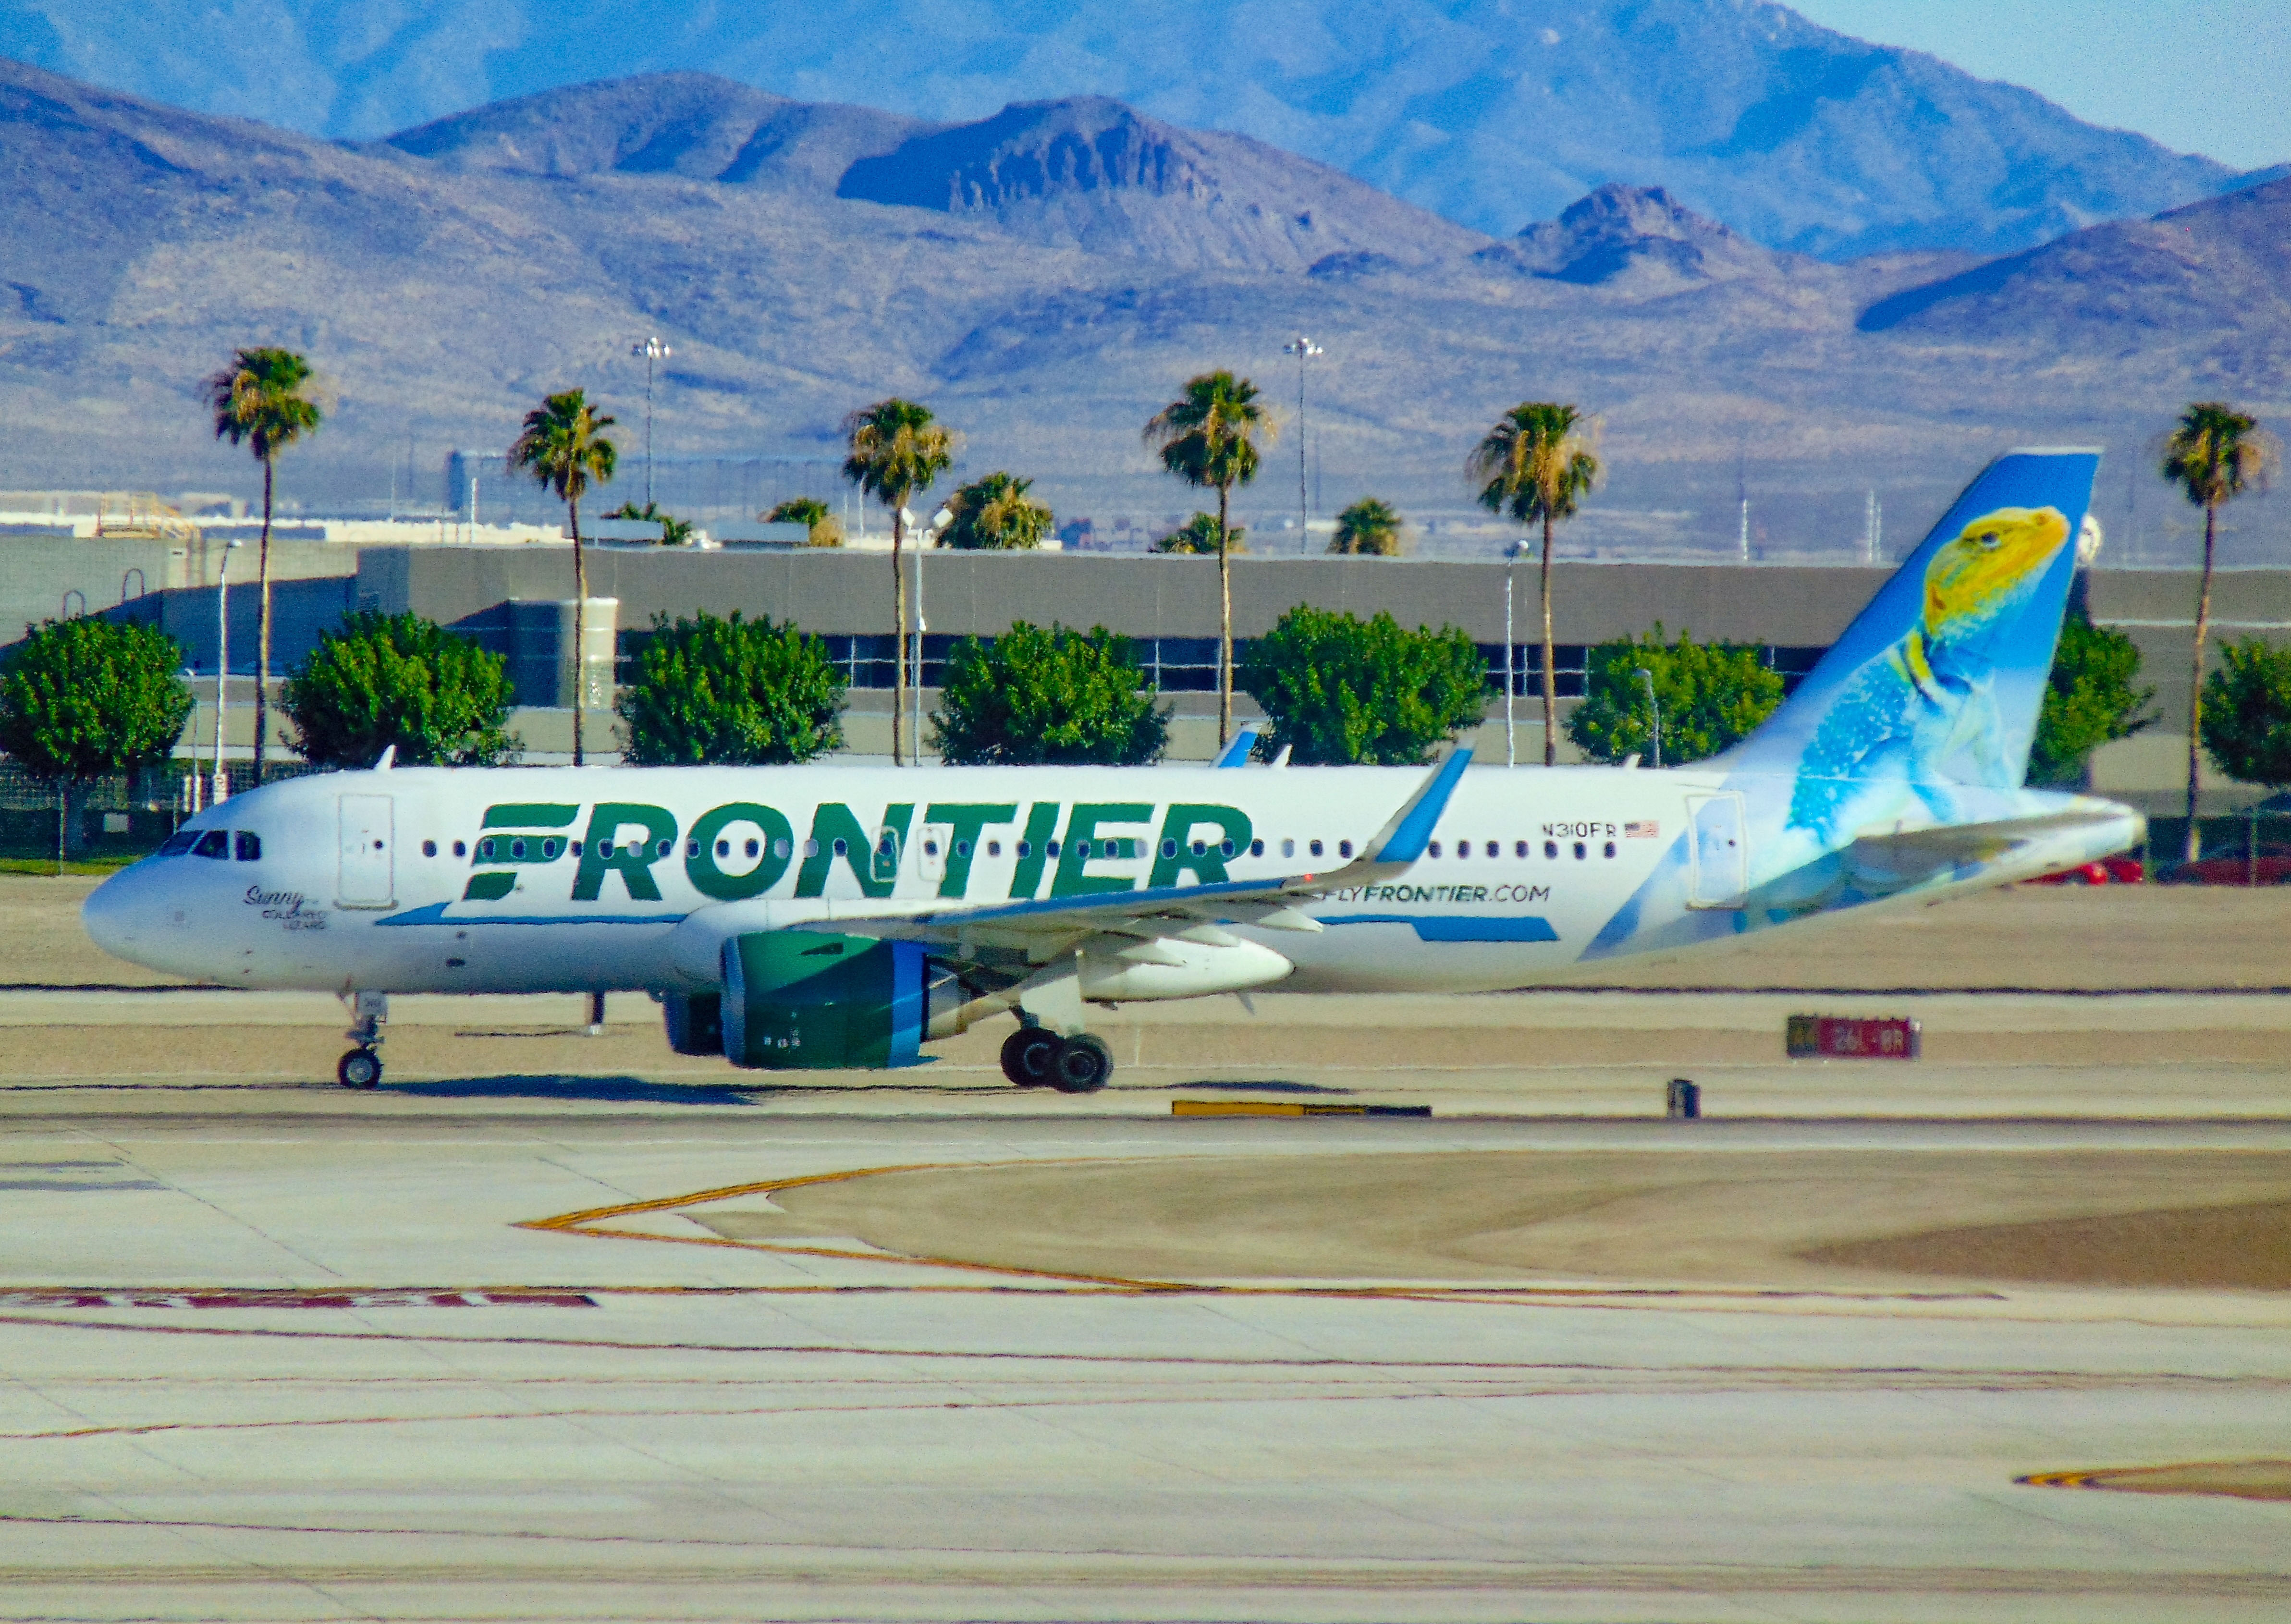 N310FR/N310FR Frontier Airlines Airbus A320neo Airframe Information - AVSpotters.com